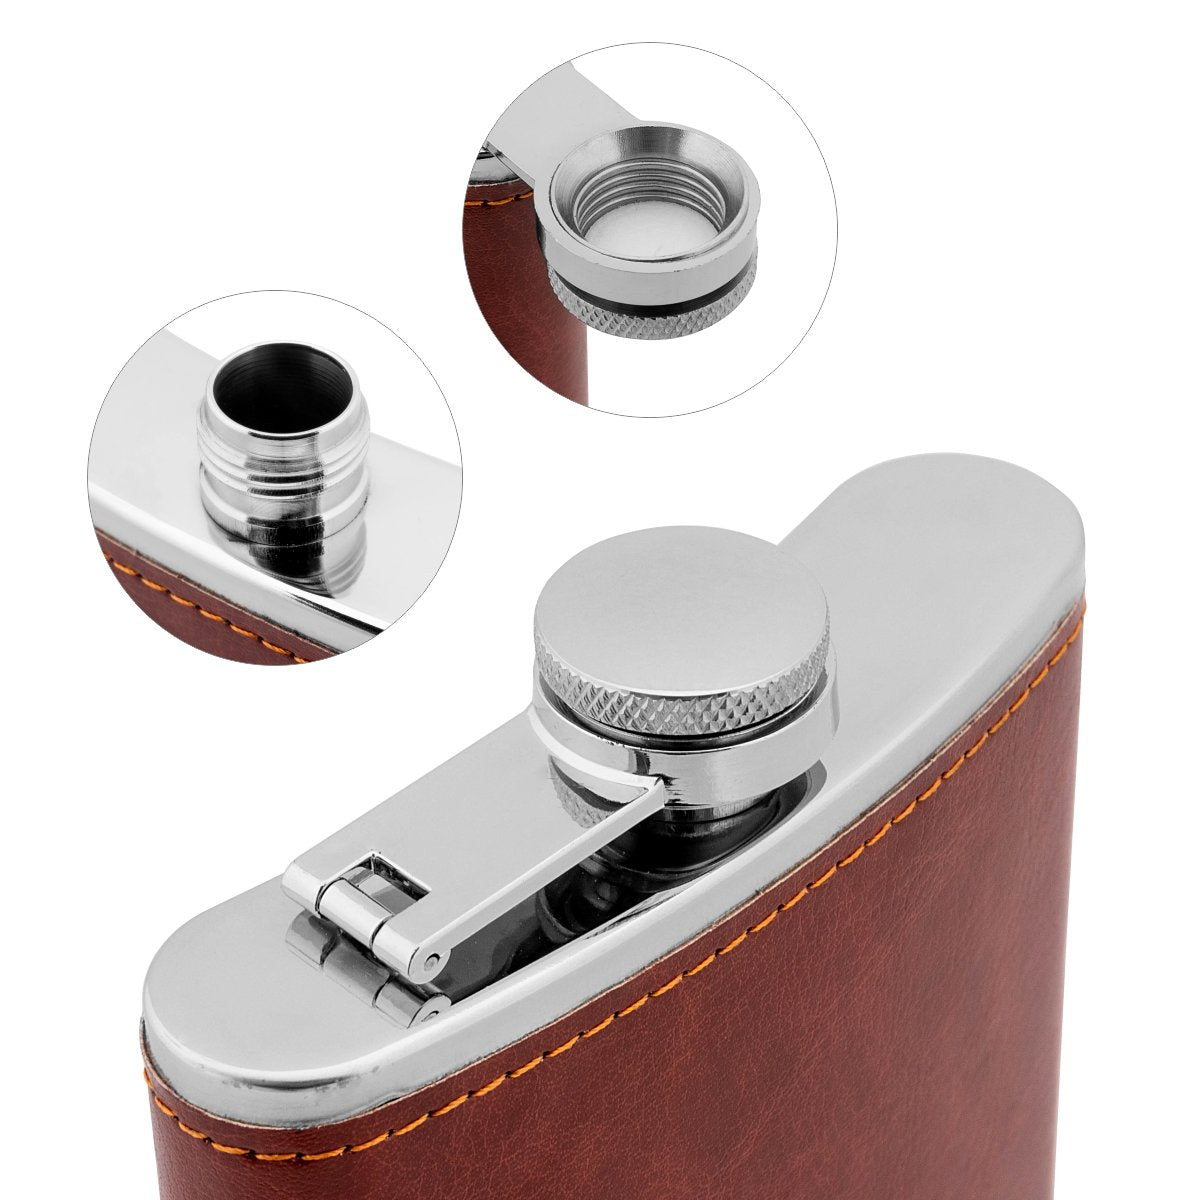 8 oz Maroon Stainless Steel Hip Flask for Bourbon, Whiskey, Vodka Set of Two